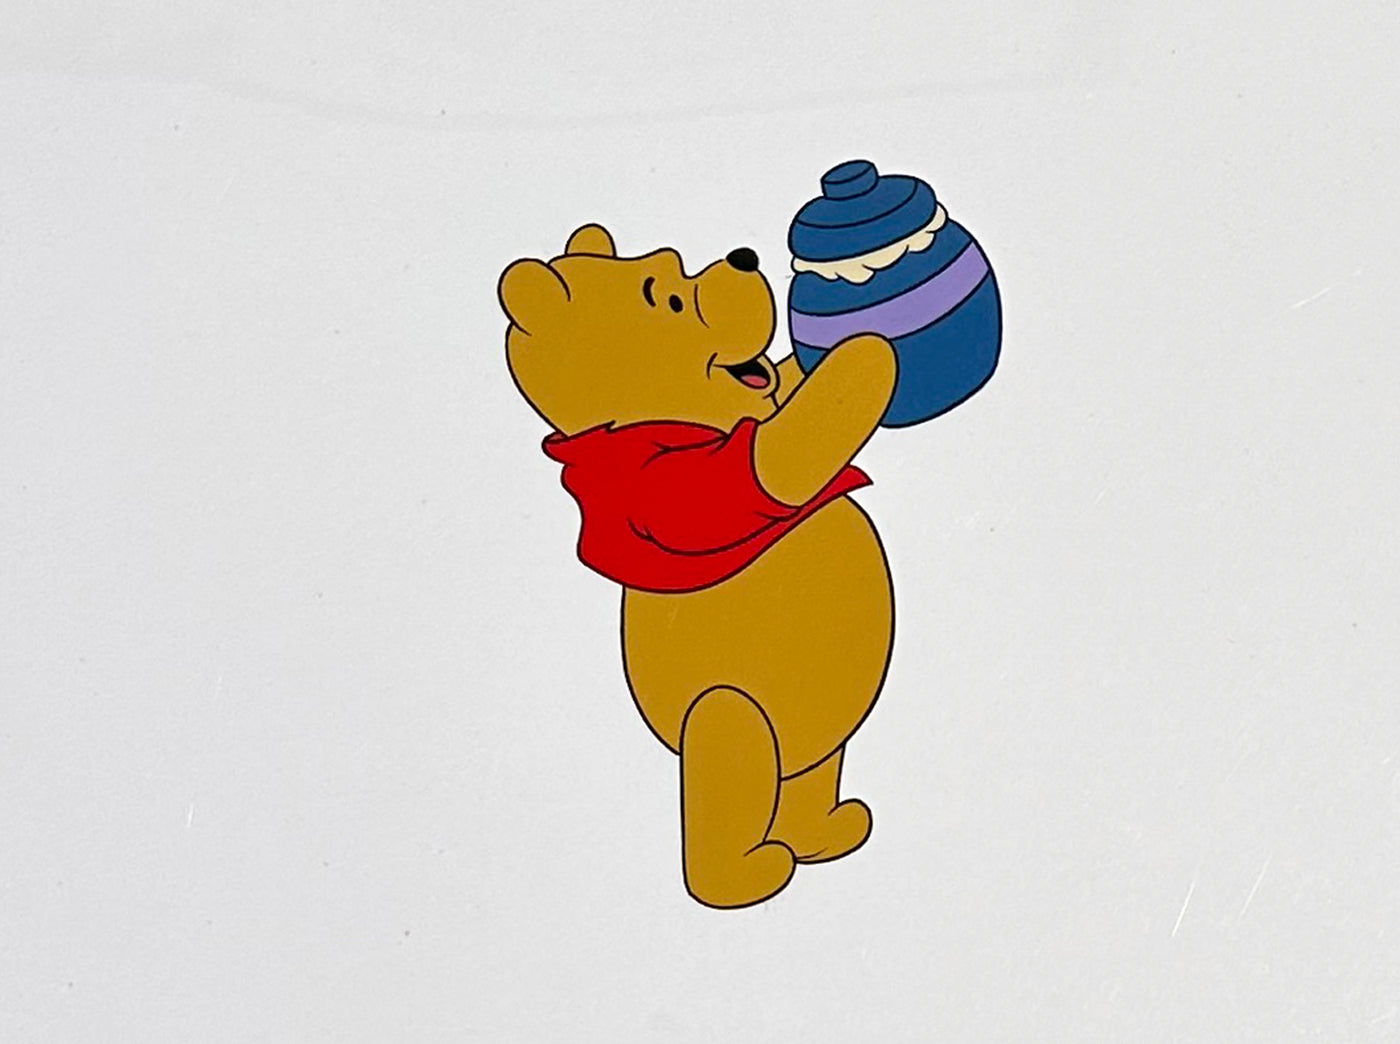 Original Walt Disney Color Model Cel from Winnie the Pooh and A Day for Eeyore featuring Winnie the Pooh